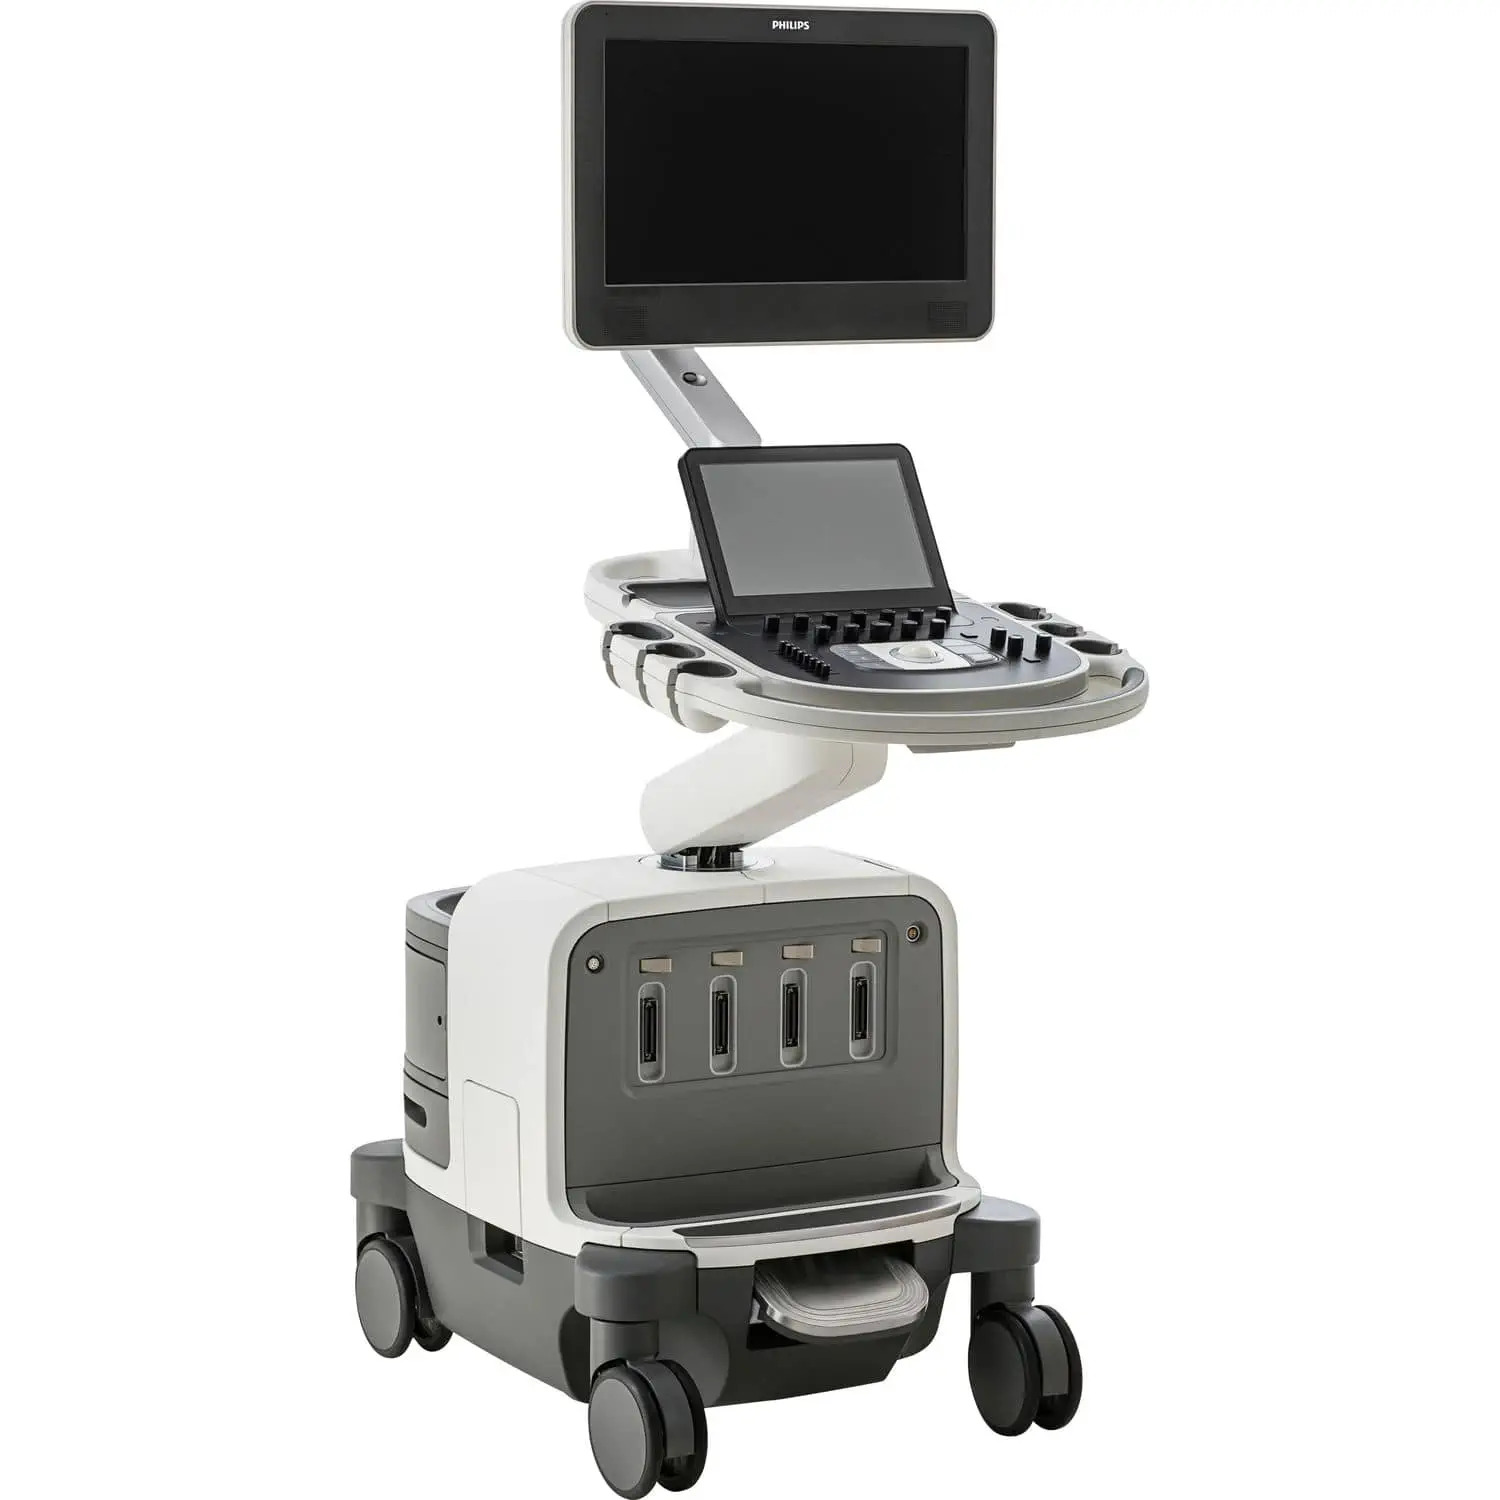 POCUS - Point Of Care UltraSonography - 1